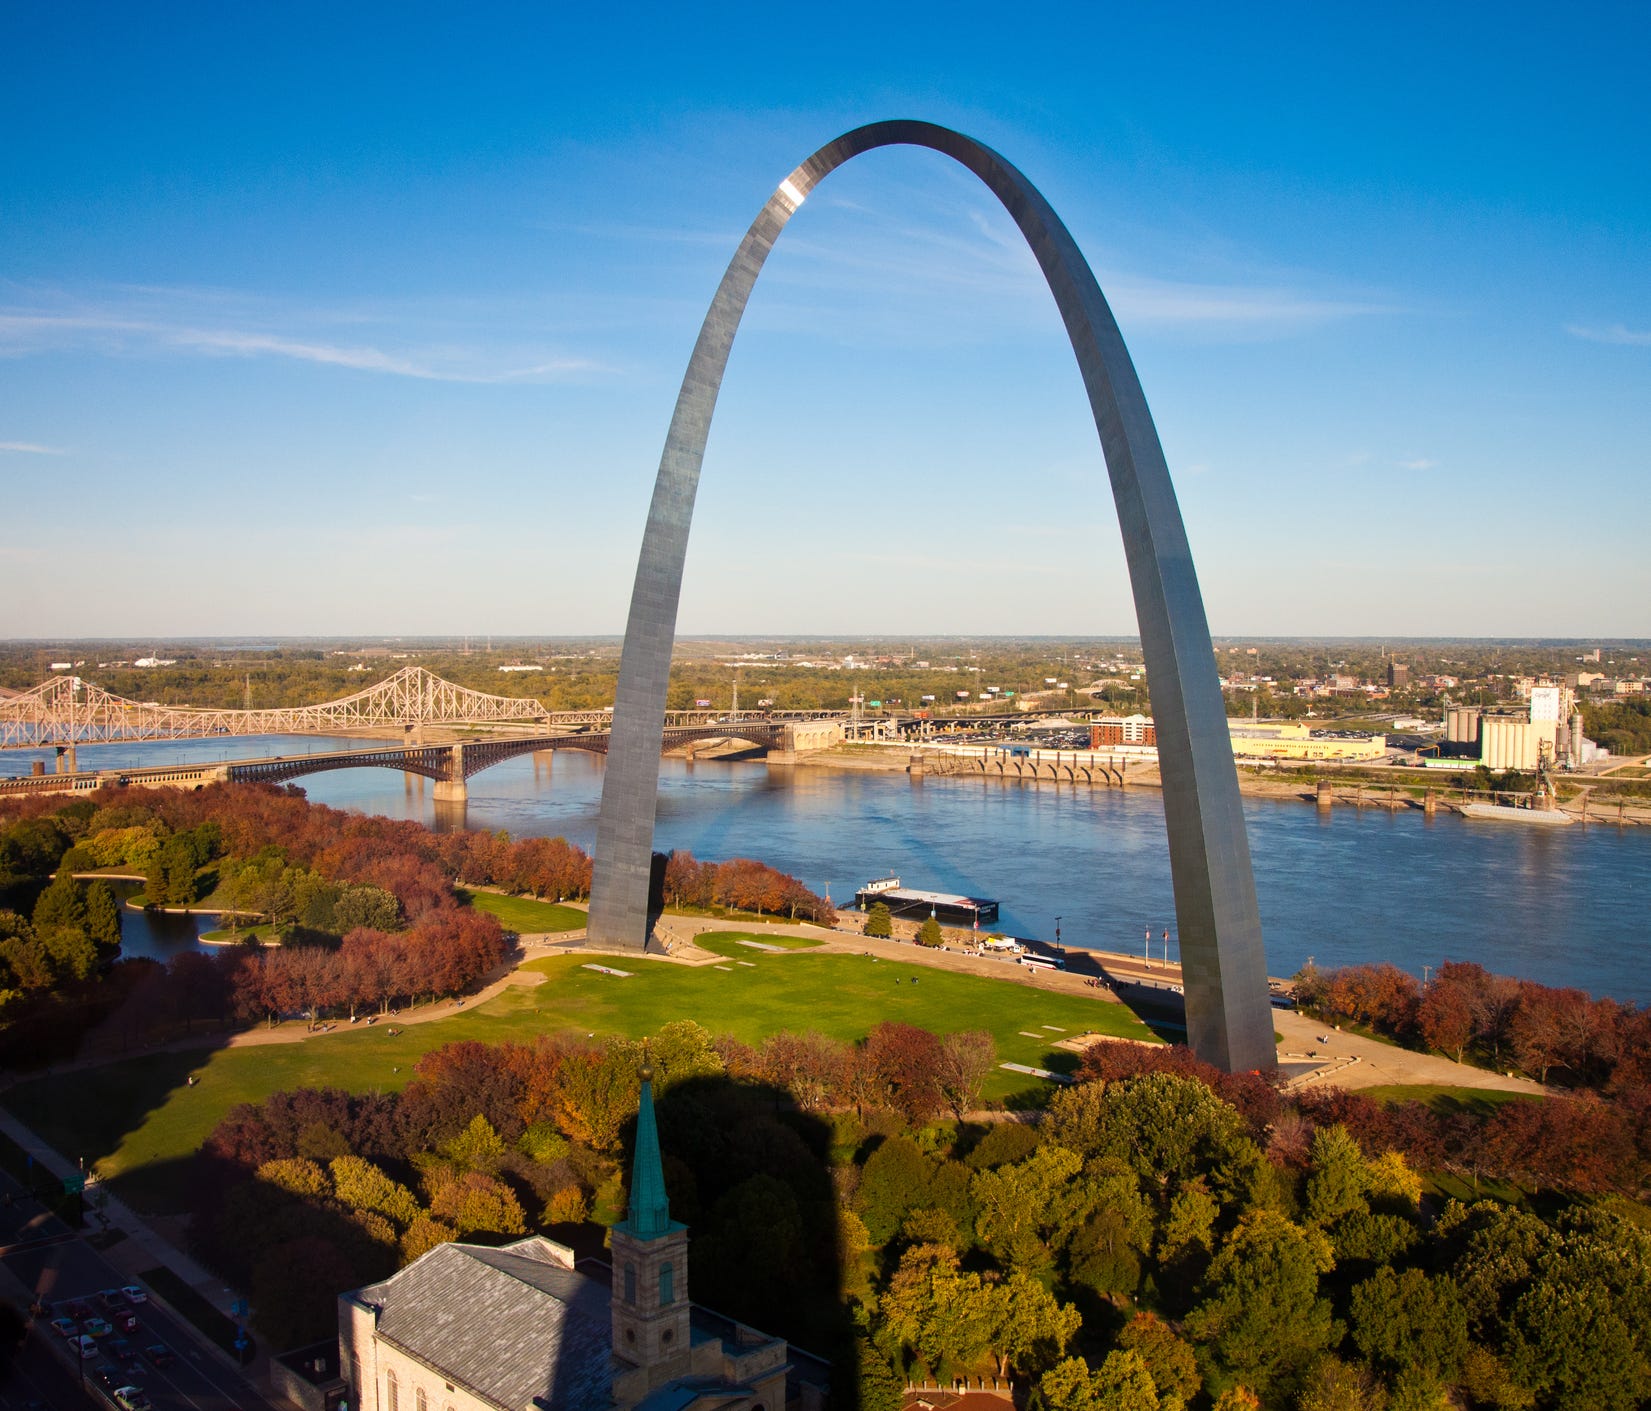 St. Louis: Underrated St. Louis is the perfect weekend destination for those in the Midwest's West North Central region. It's under a four-hour drive from Kansas City and Indianapolis, and there's so much more to do than just going to the top of Gate